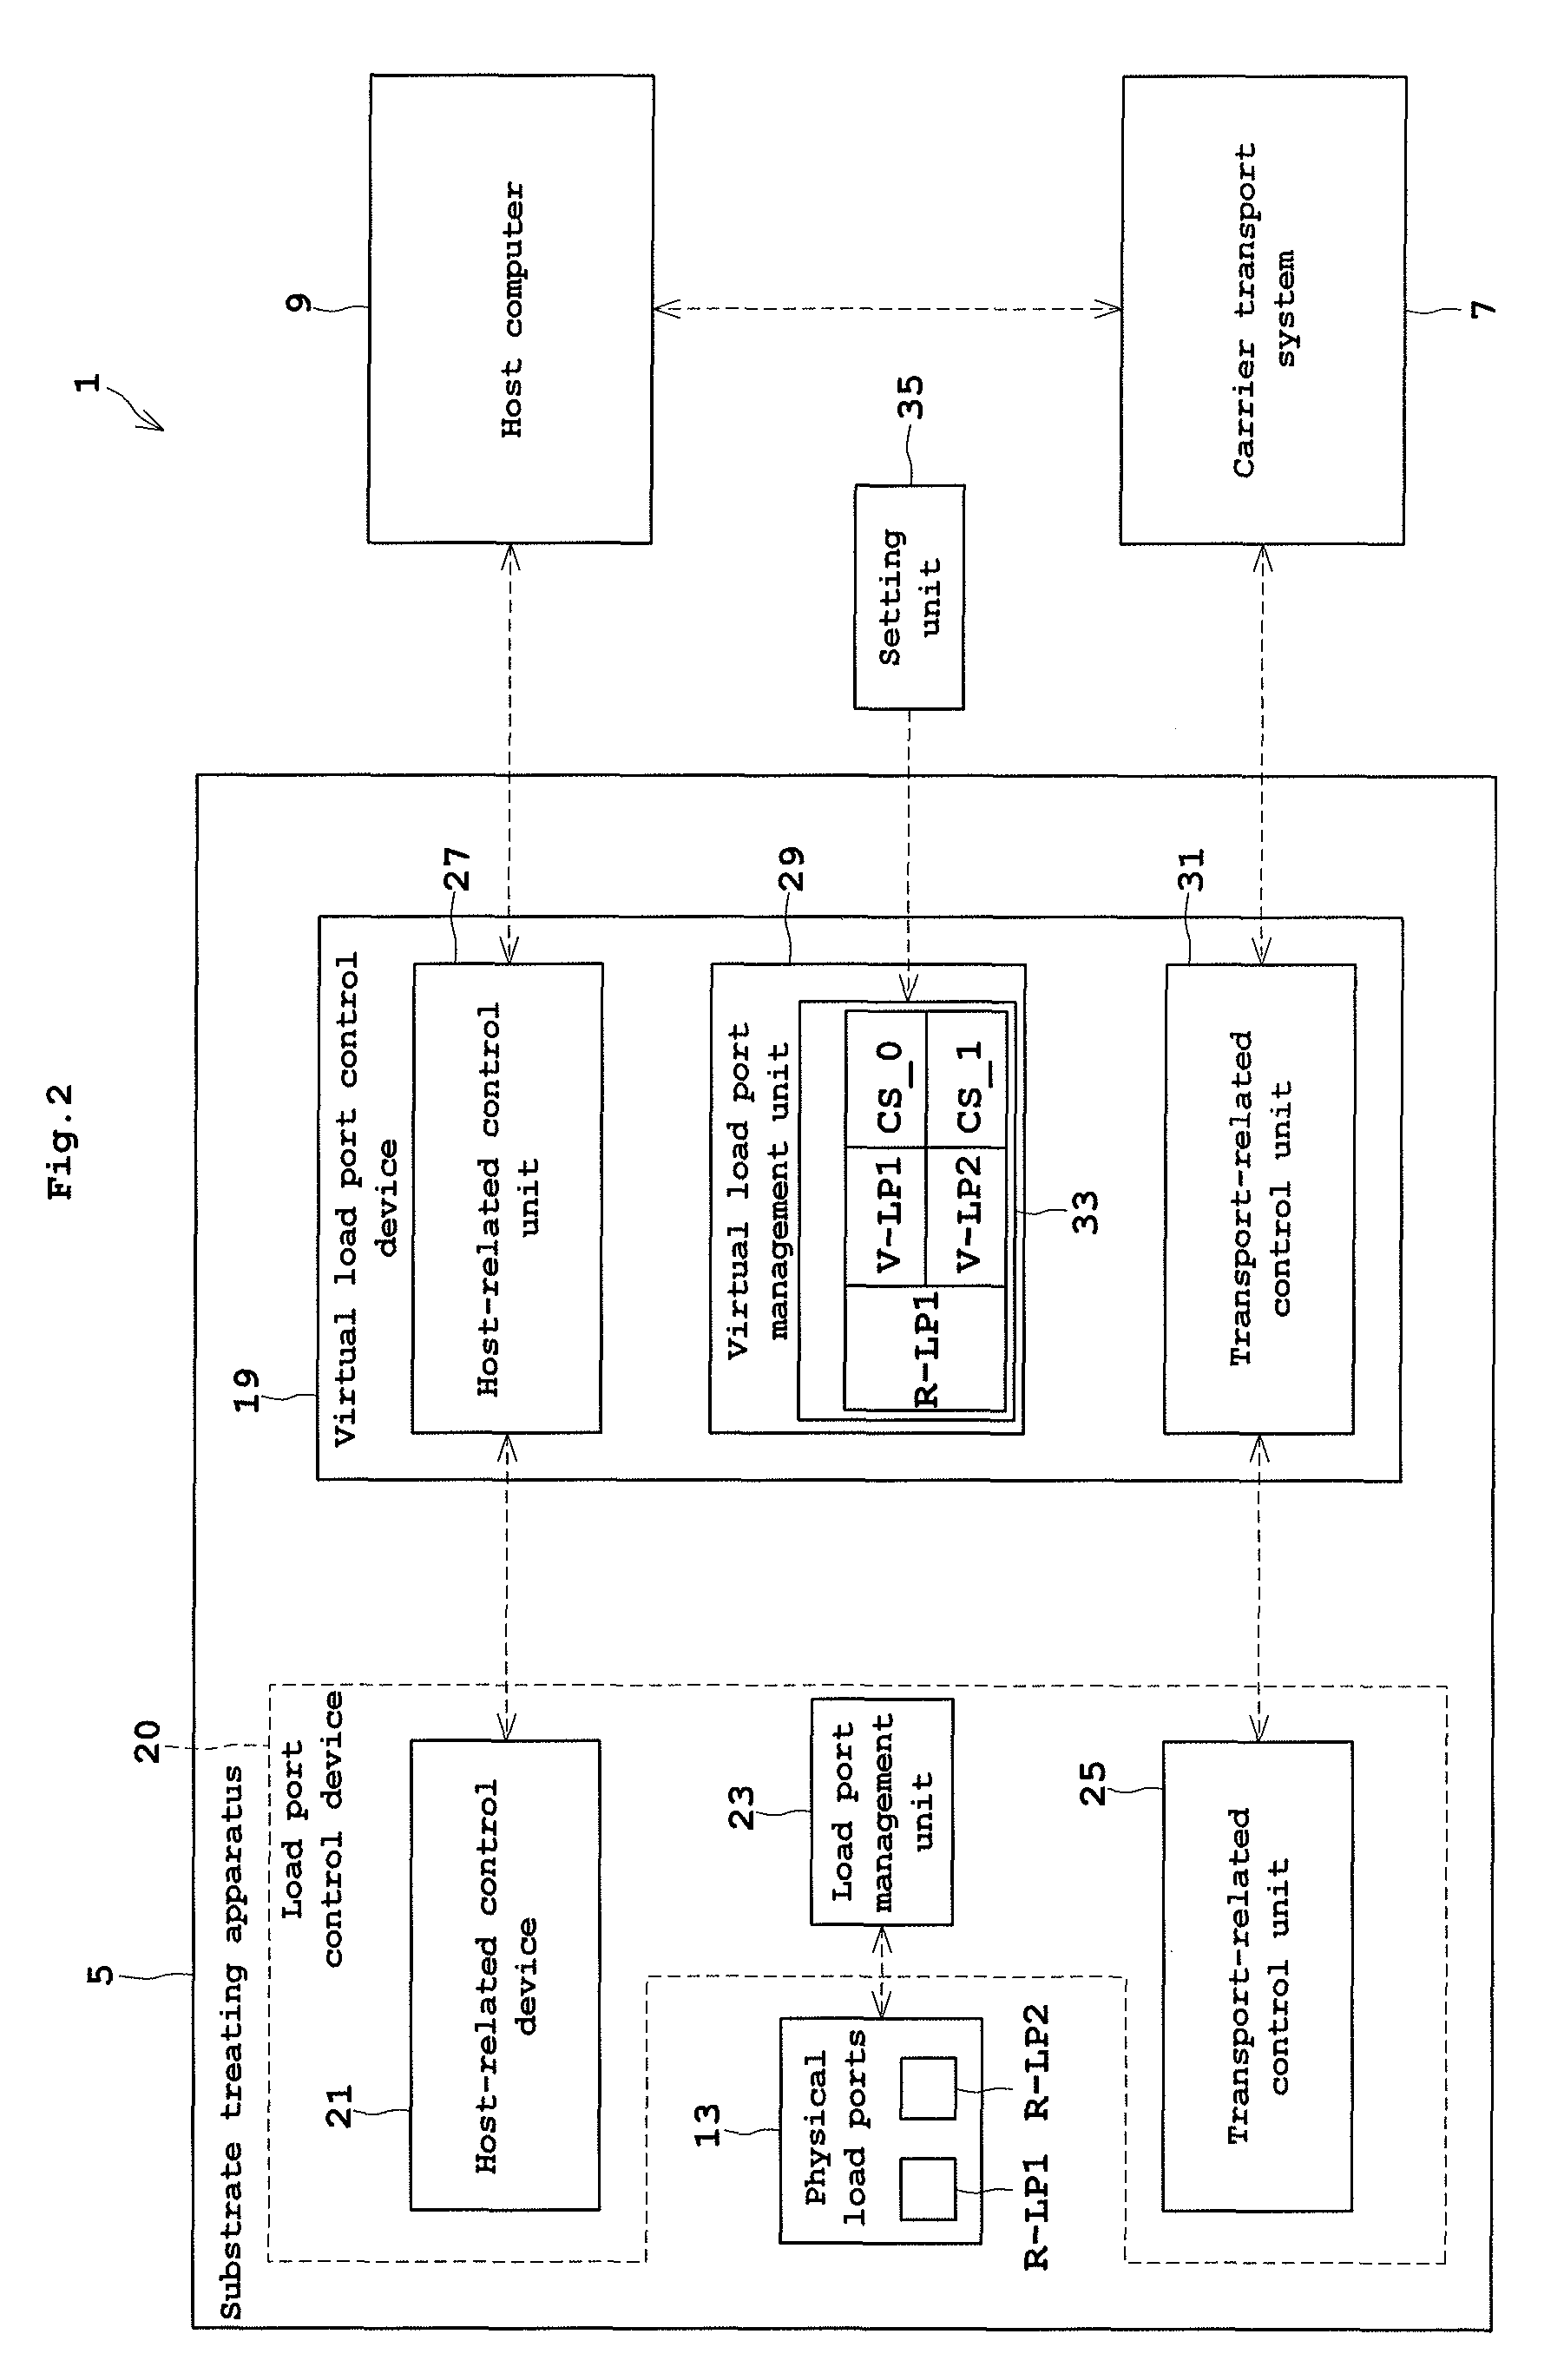 Control apparatus, a substrate treating method, a substrate treating system, a method of operating a substrate treating system, a load port control apparatus, and a substrate treating system having the load port control apparatus